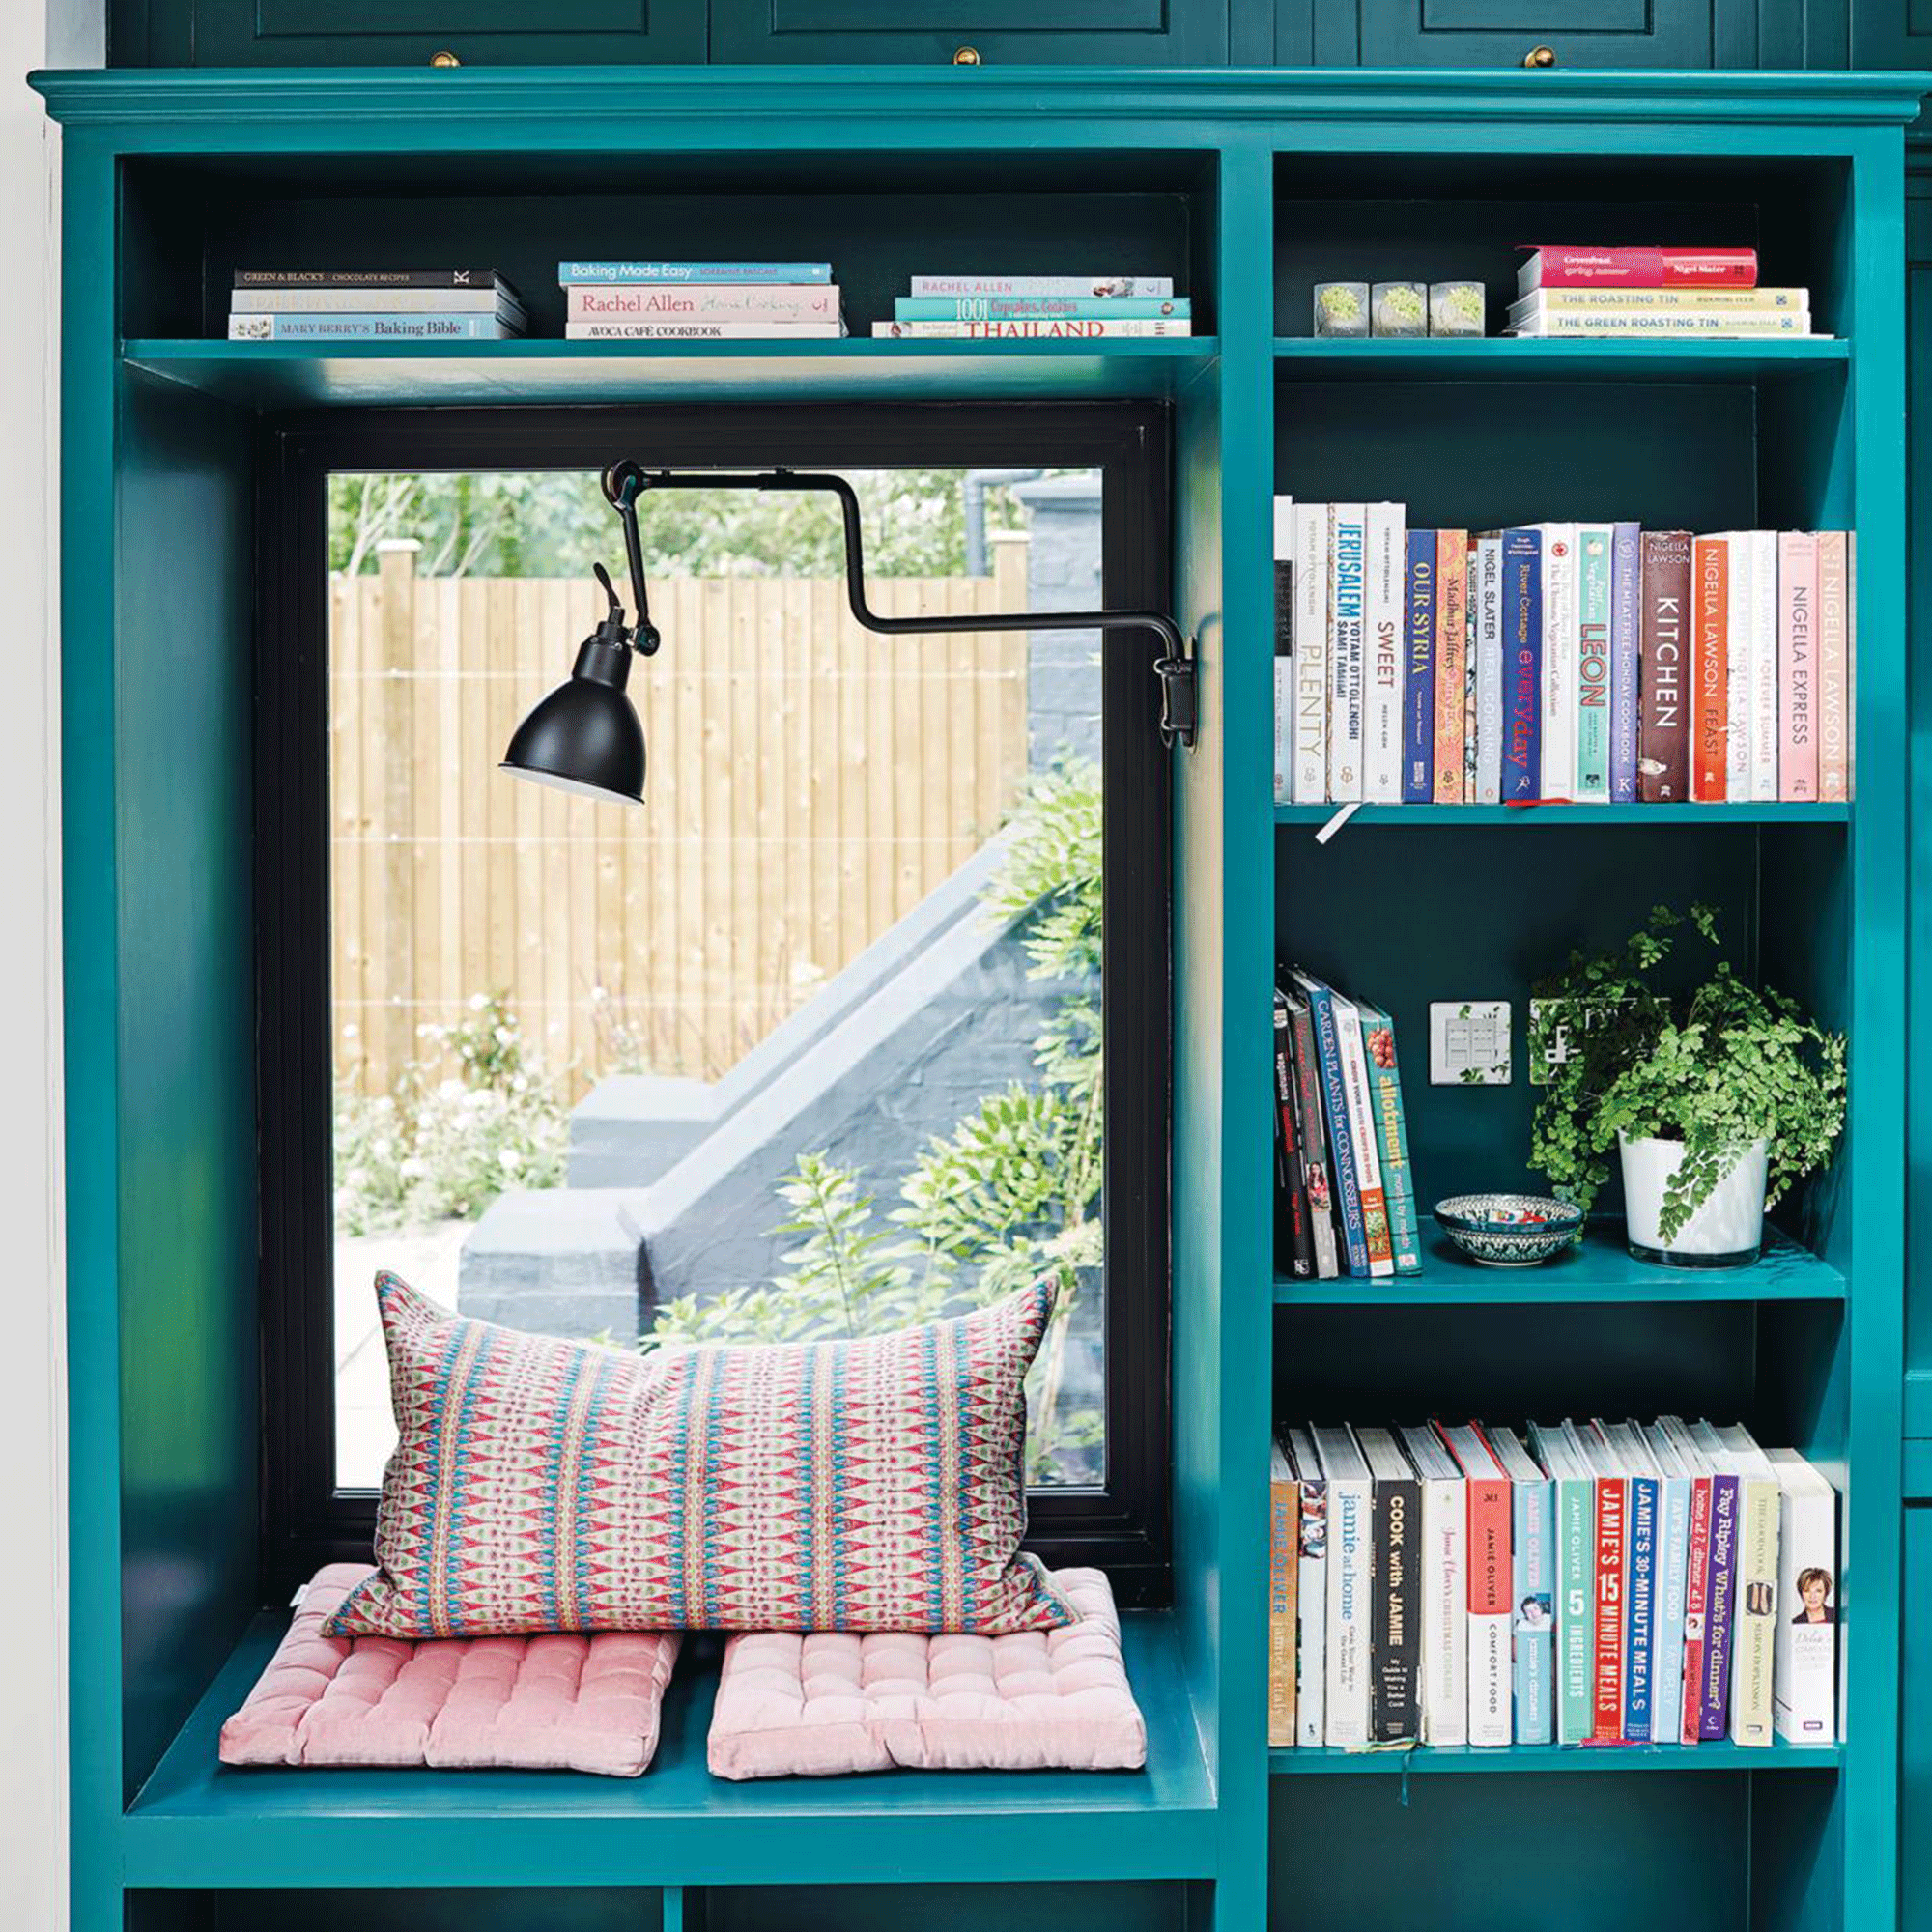 Teal shelving with seating area